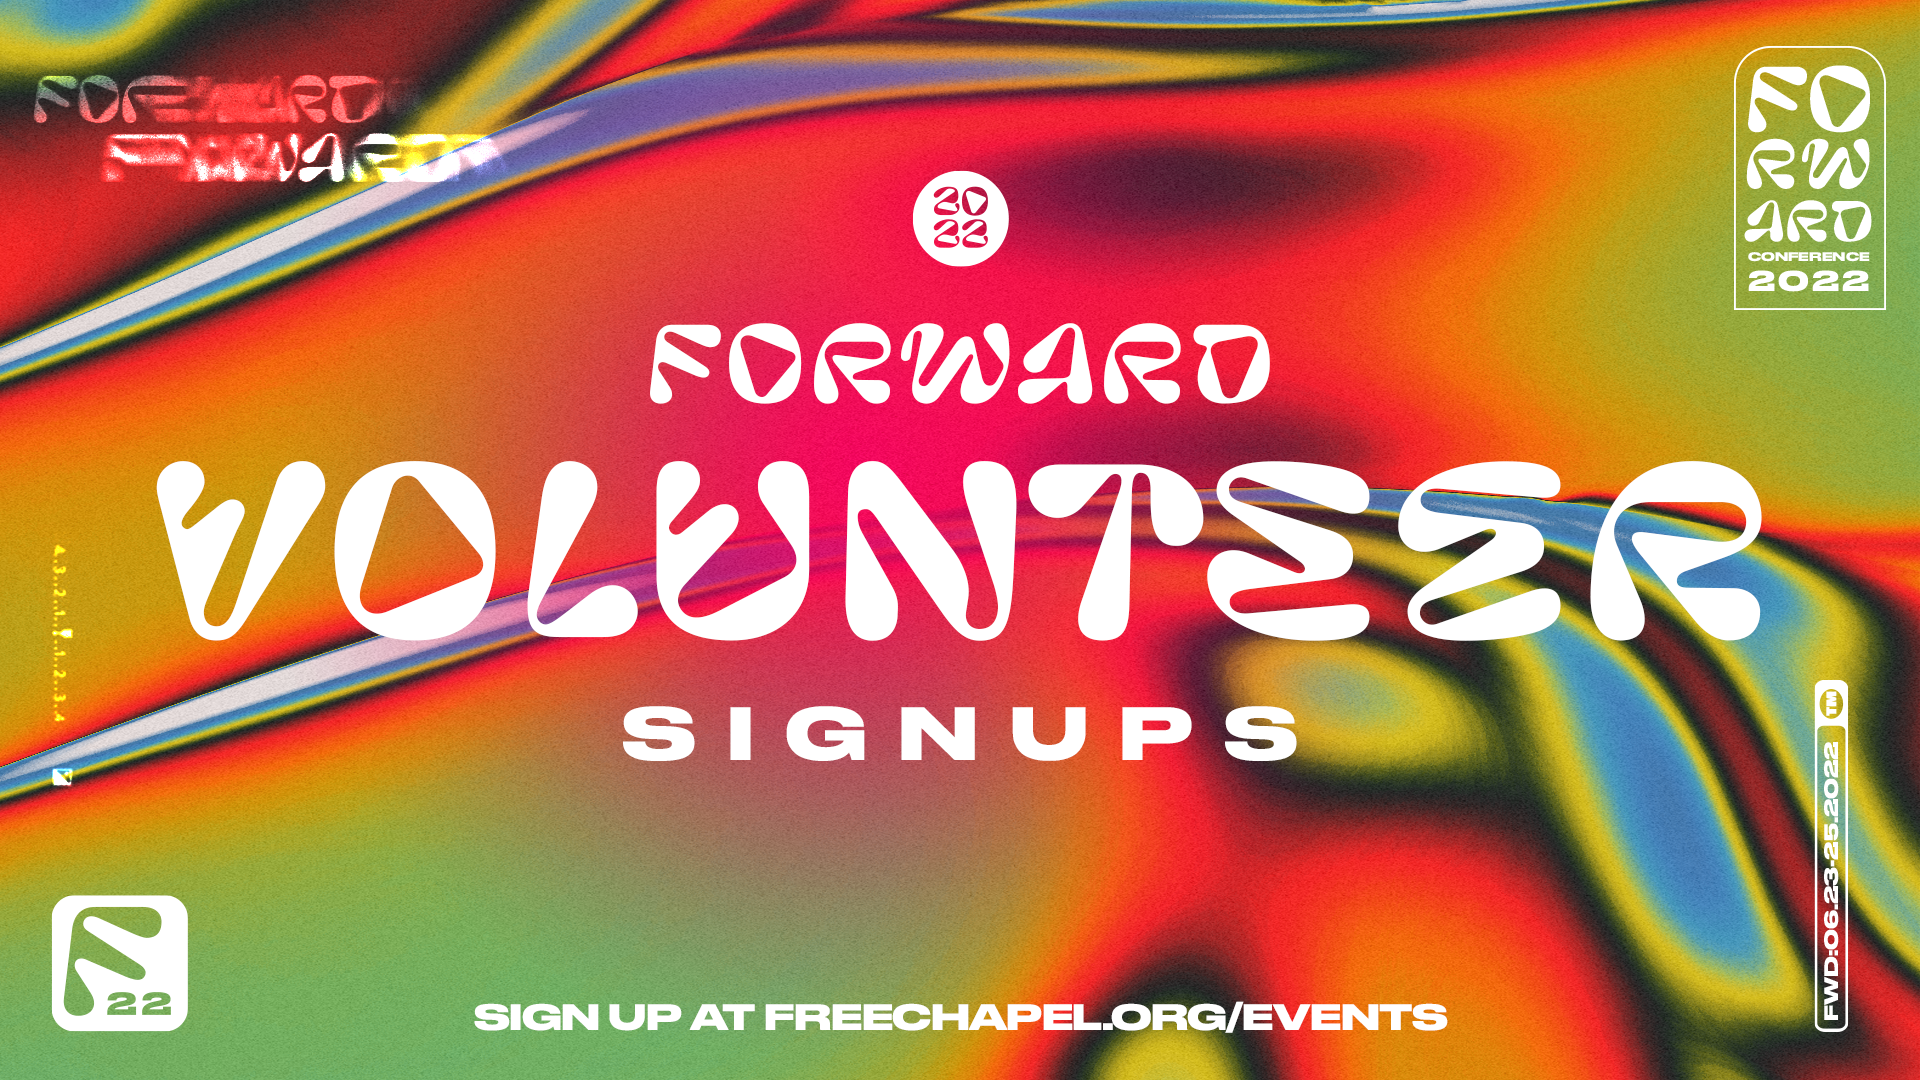 Forward Volunteer Sign Up at the Gwinnett campus